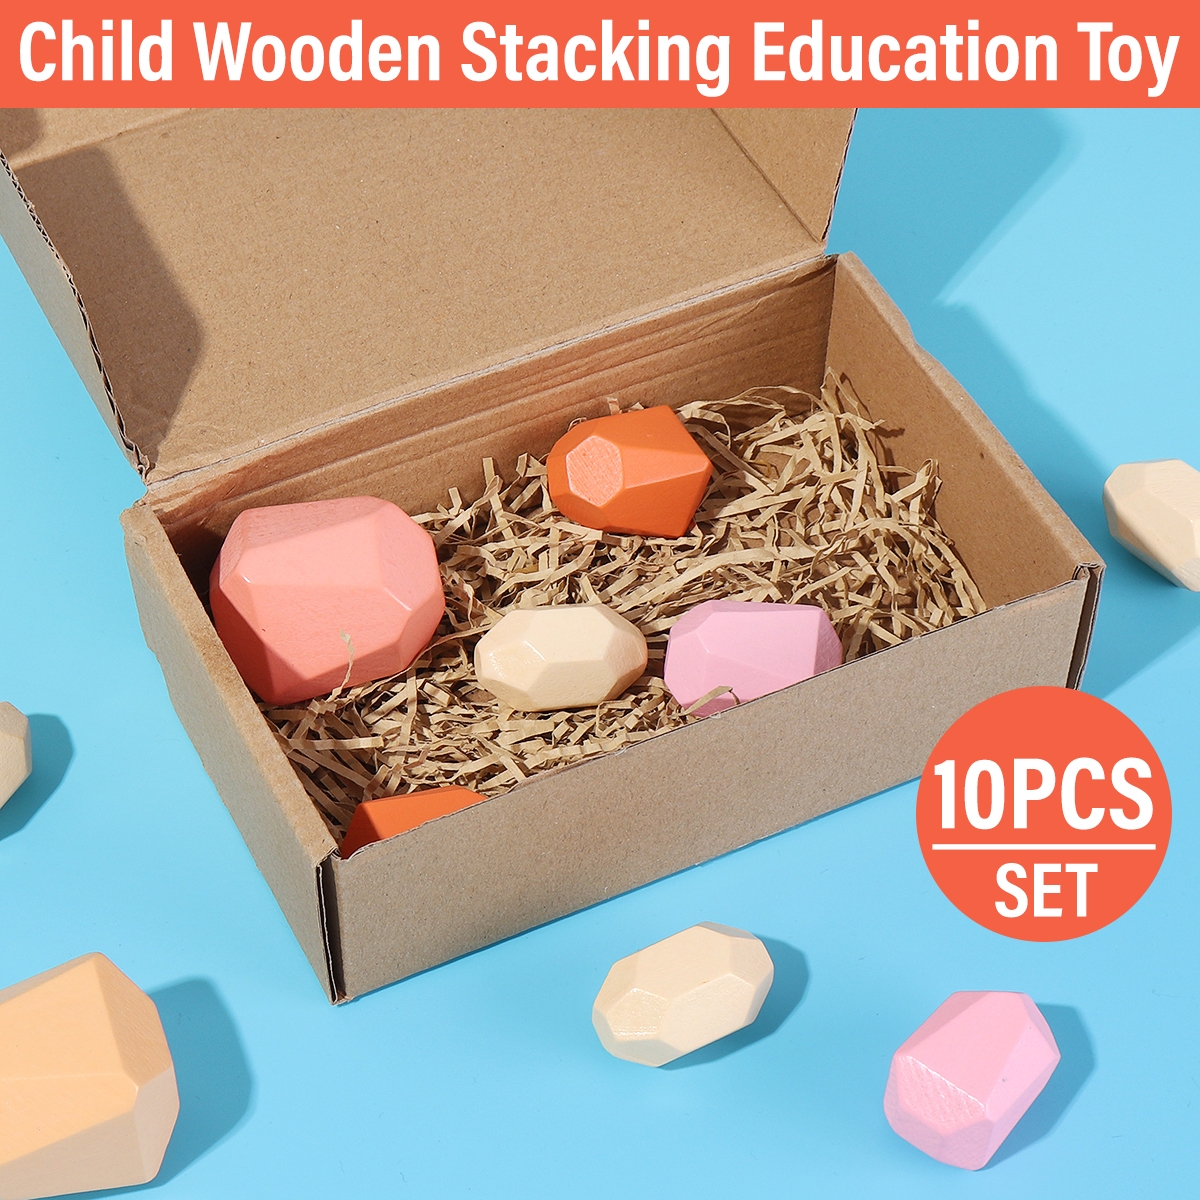 10 Pcs Children Wood Colorful Stone Stacking Game Building Block Education Set Toy